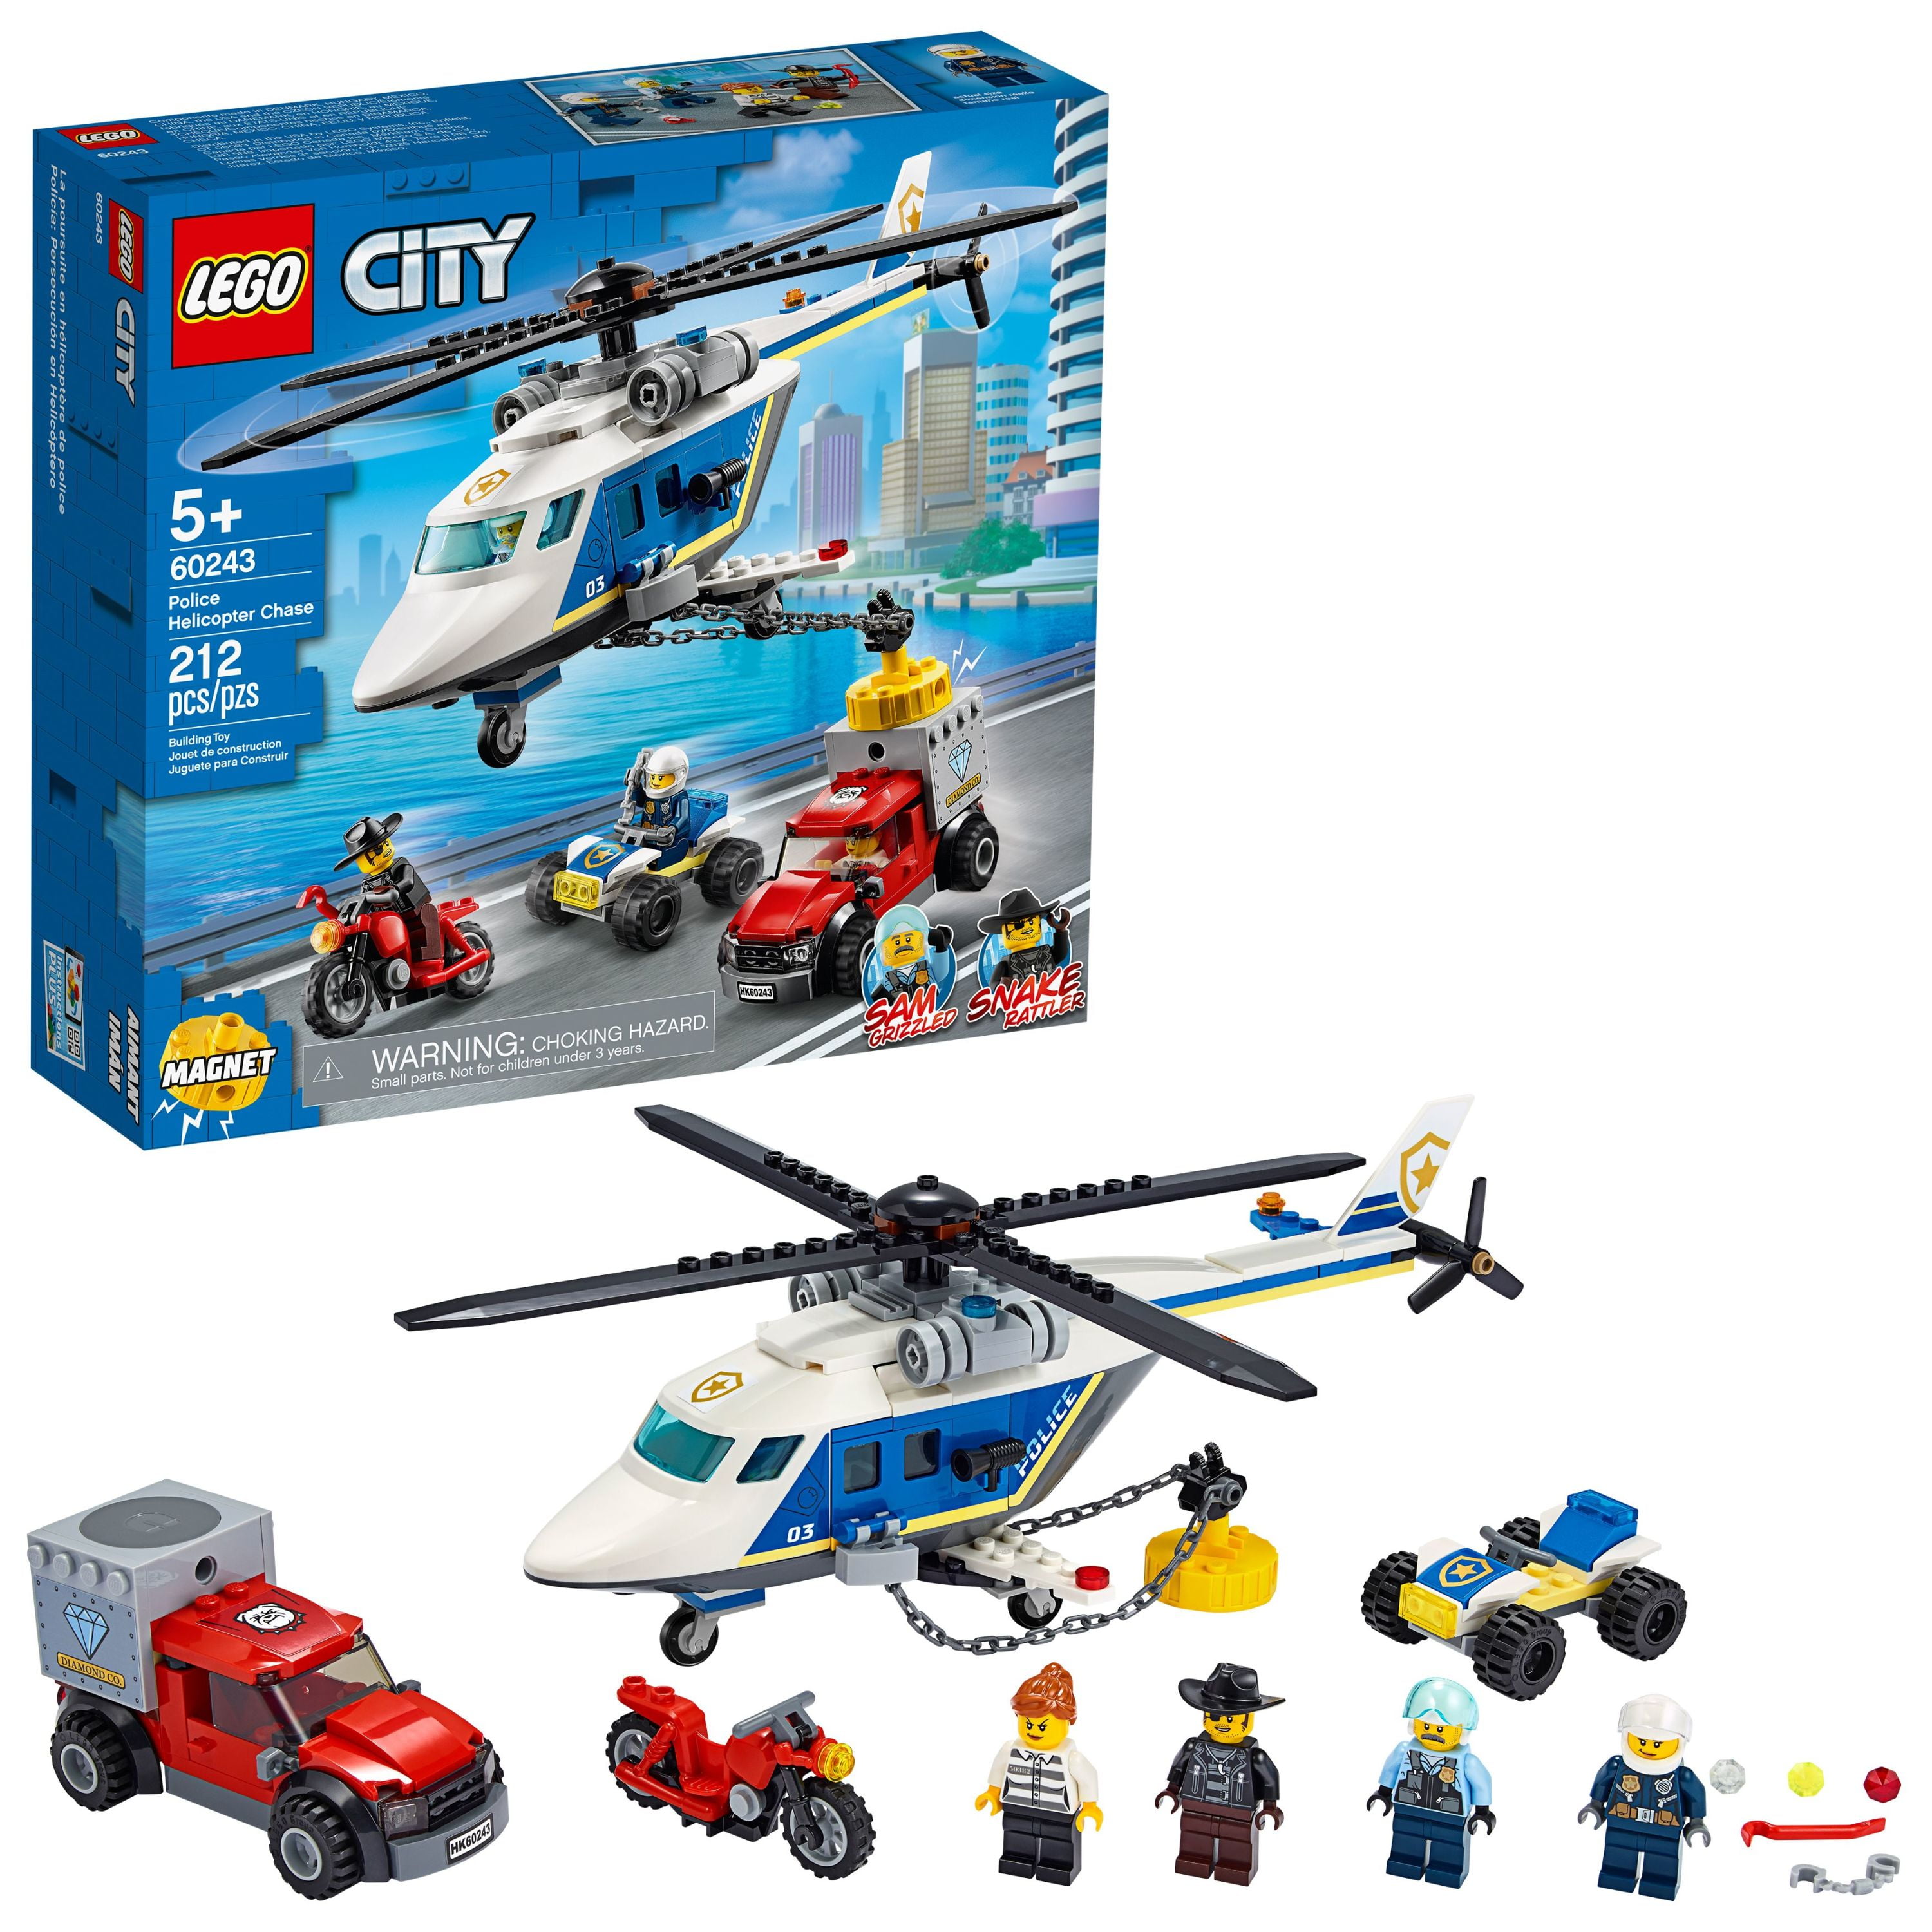 campagne Dader Burgerschap LEGO City Police Helicopter Chase 60243 Building Toy Set (212 Pieces) -  Walmart.com